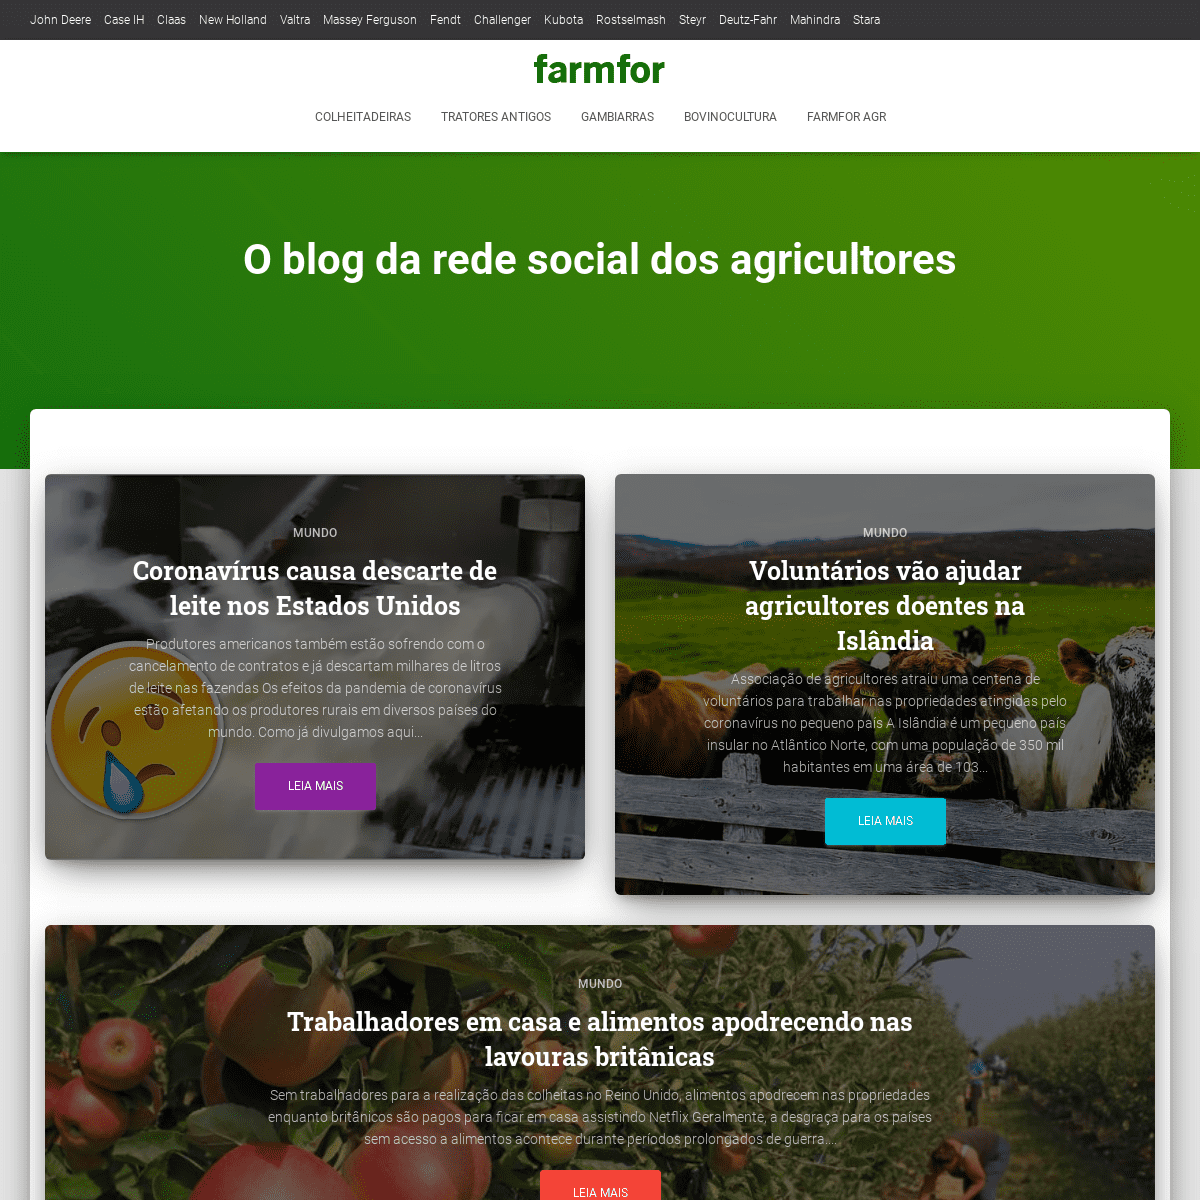 A complete backup of farmfor.com.br